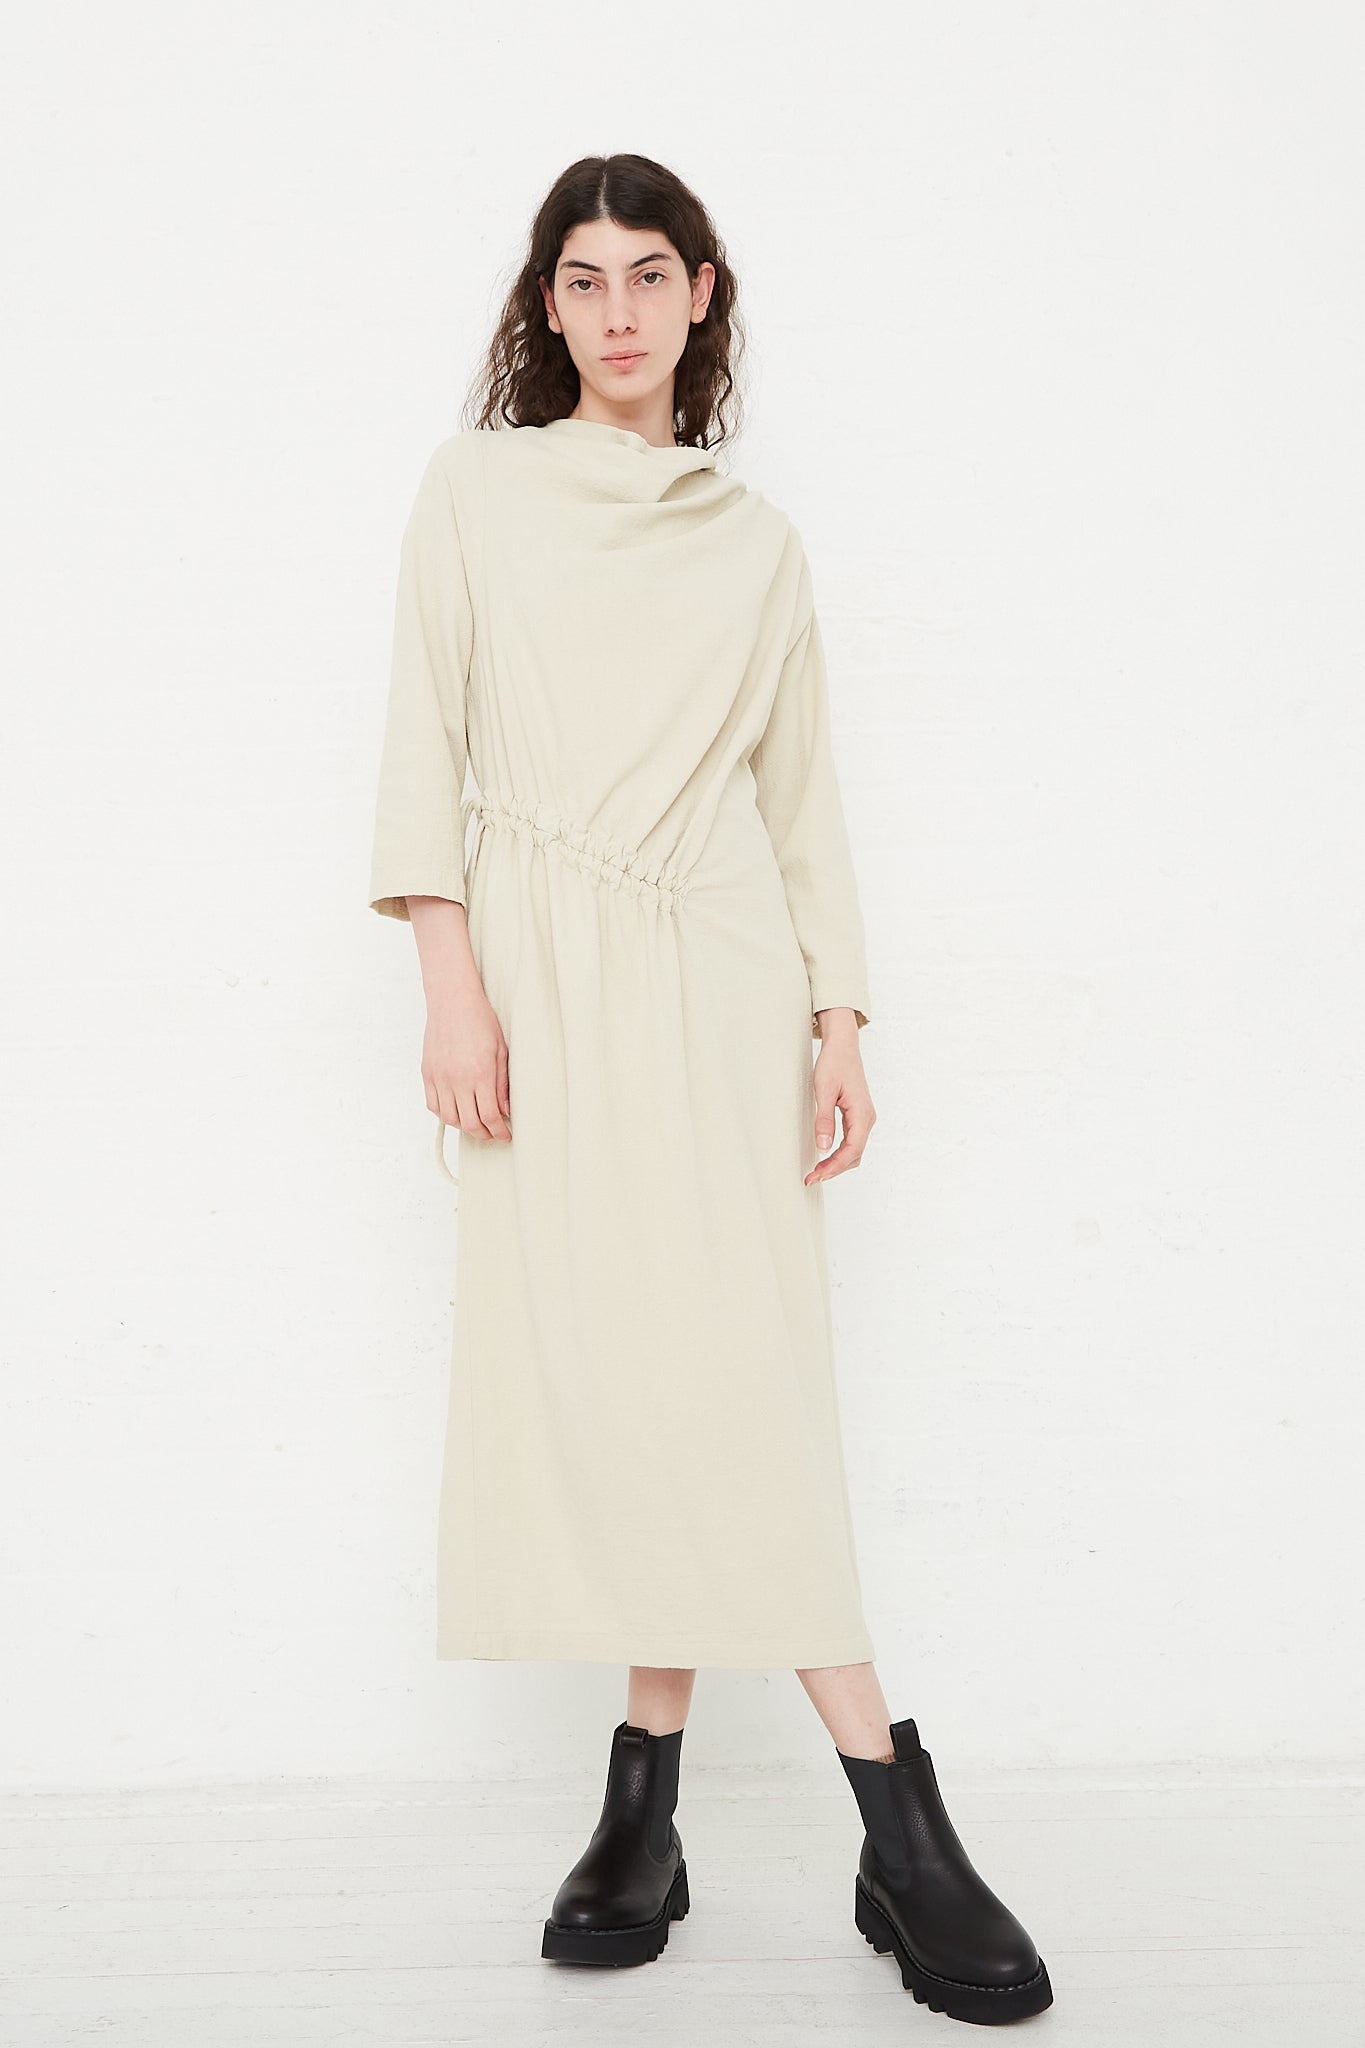 Cotton Woven Ruched Dress in Ivory by Black Crane for Oroboro Front